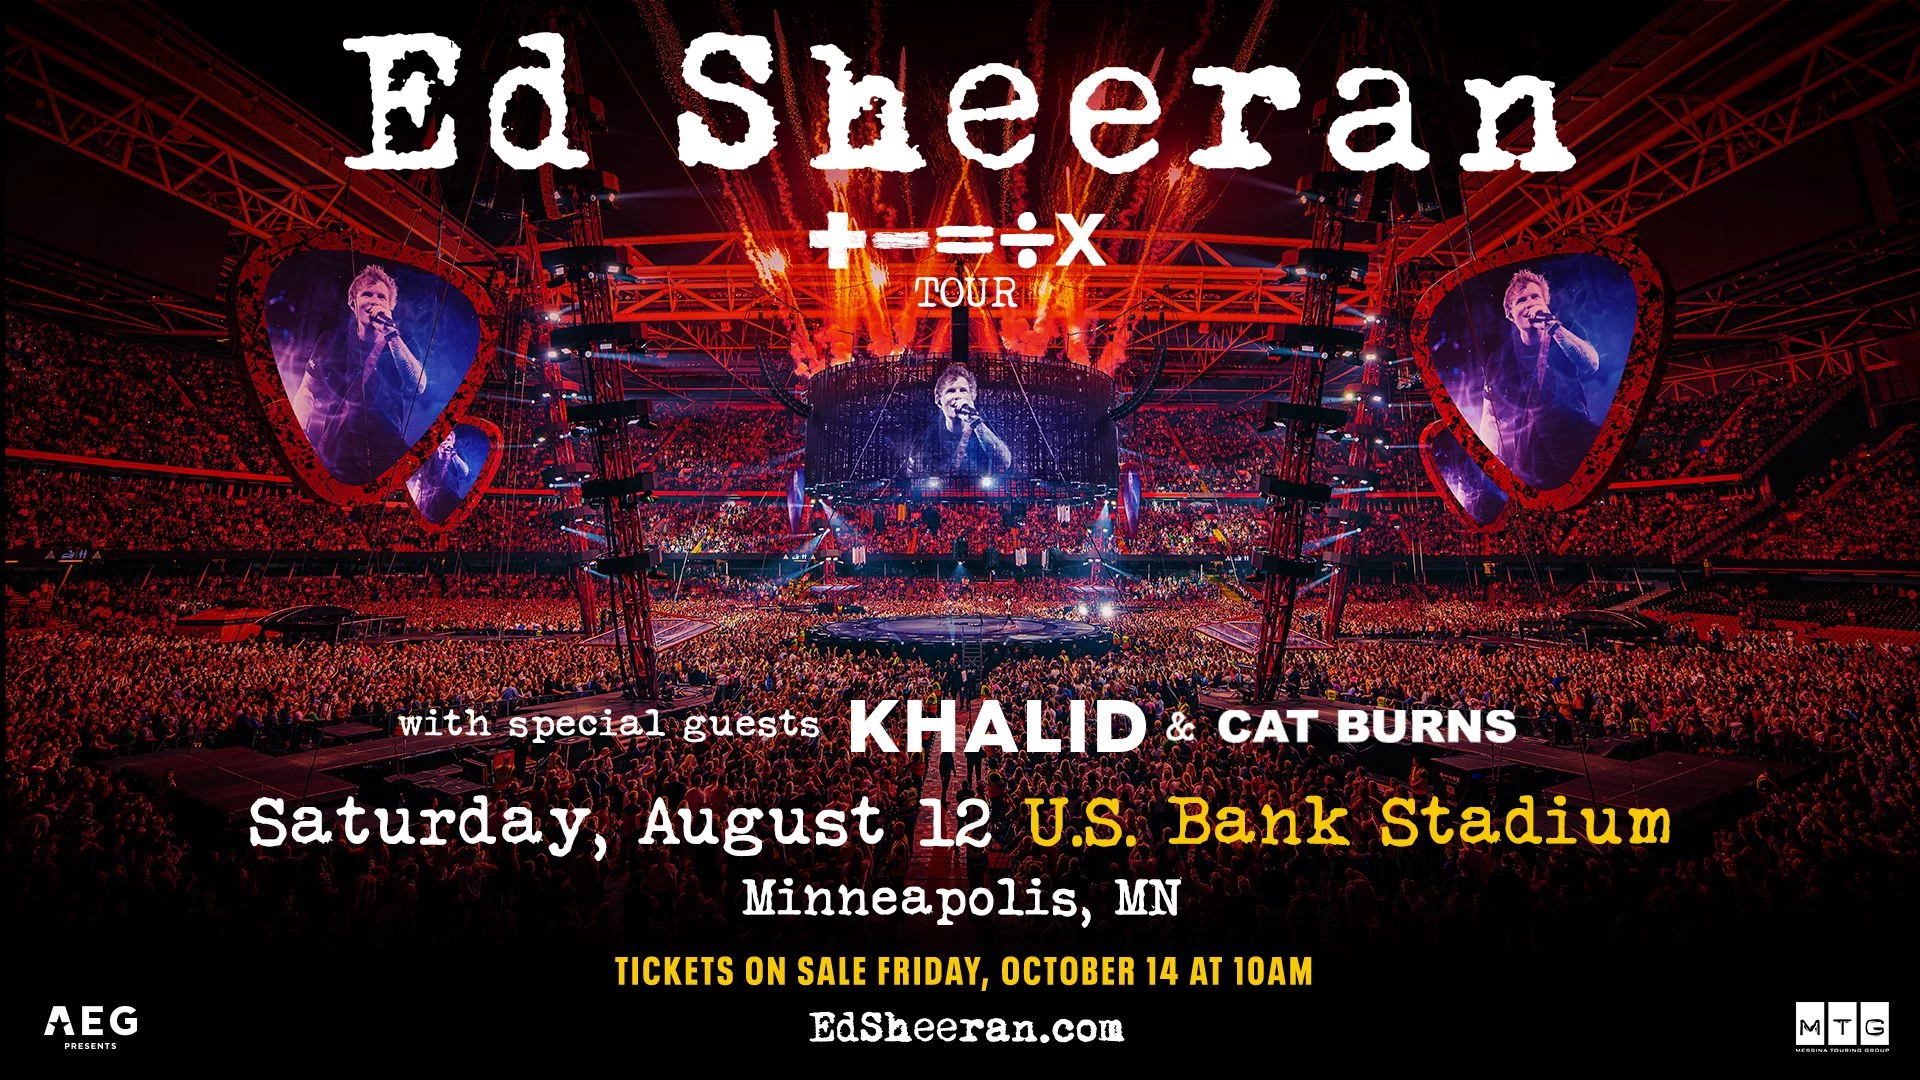 Get Excited! Minnesota One of Ed Sheeran's Stops in 2023